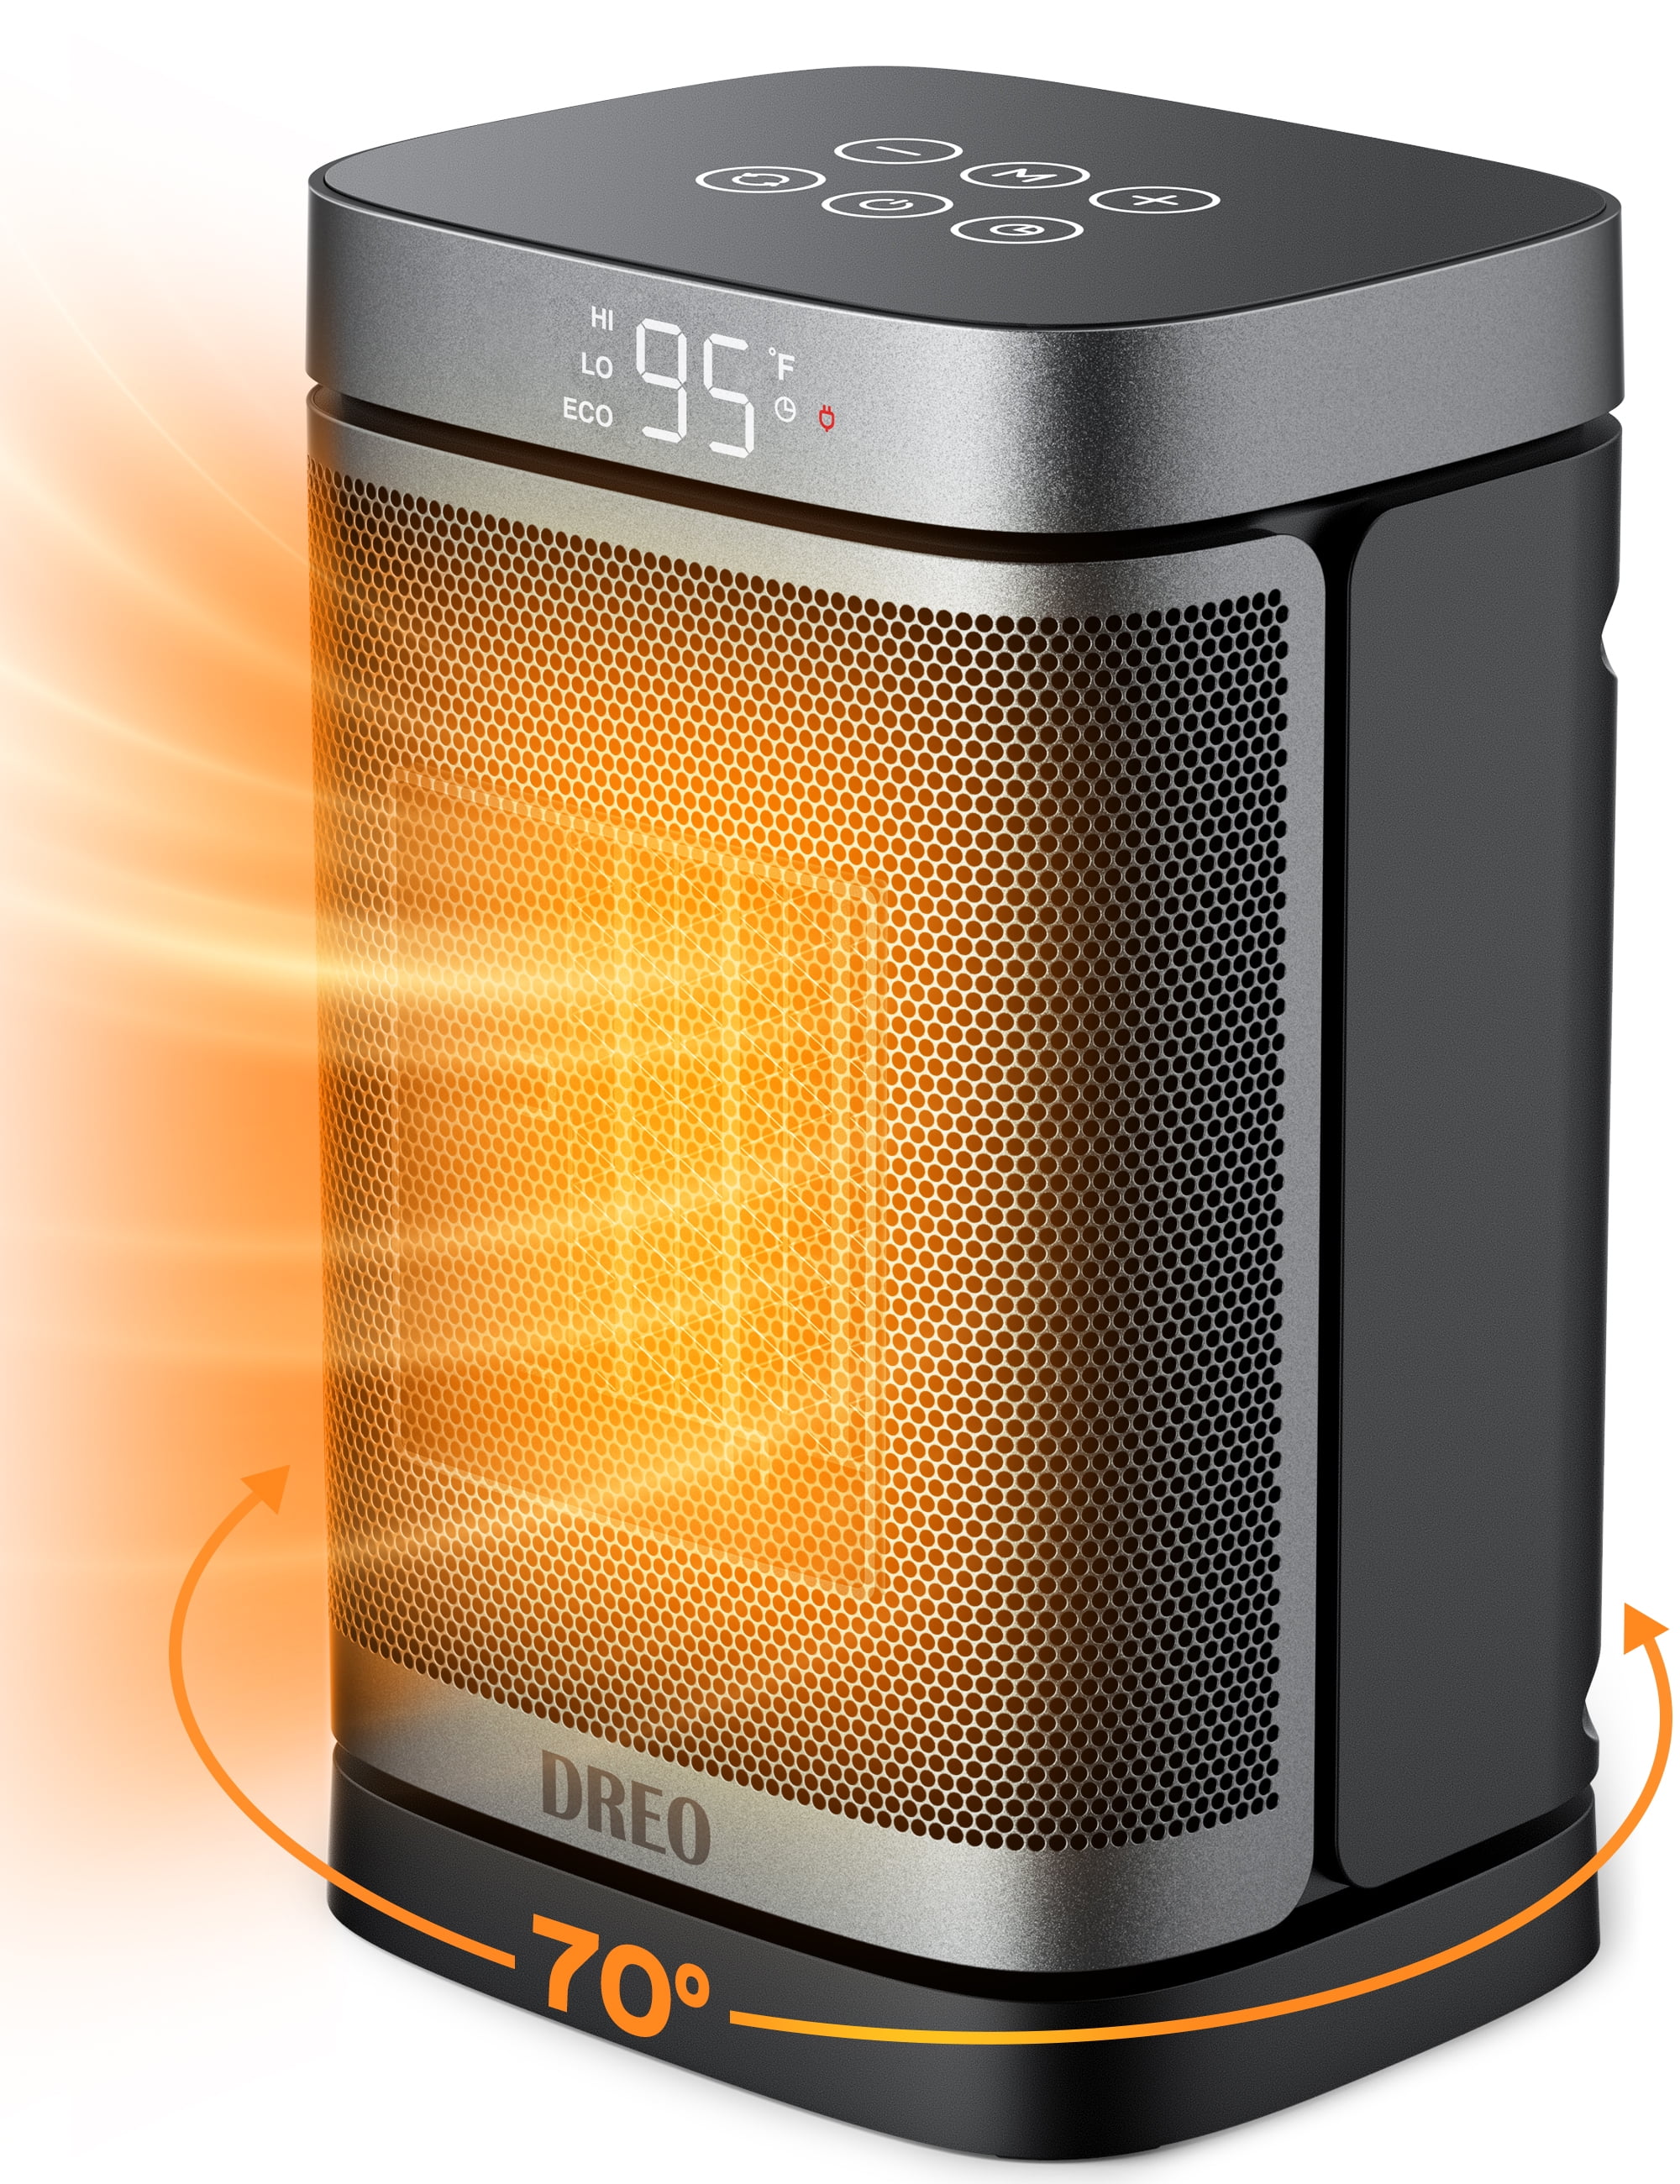 Decorative so much Replenishment Dreo Space Heater, Heater, Electric Heater, Portable Electric Heater with  70°Oscillation, 1500W PTC with Oscillation and thermostat, for Indoor Use,  Small Heater for Office Home - Walmart.com